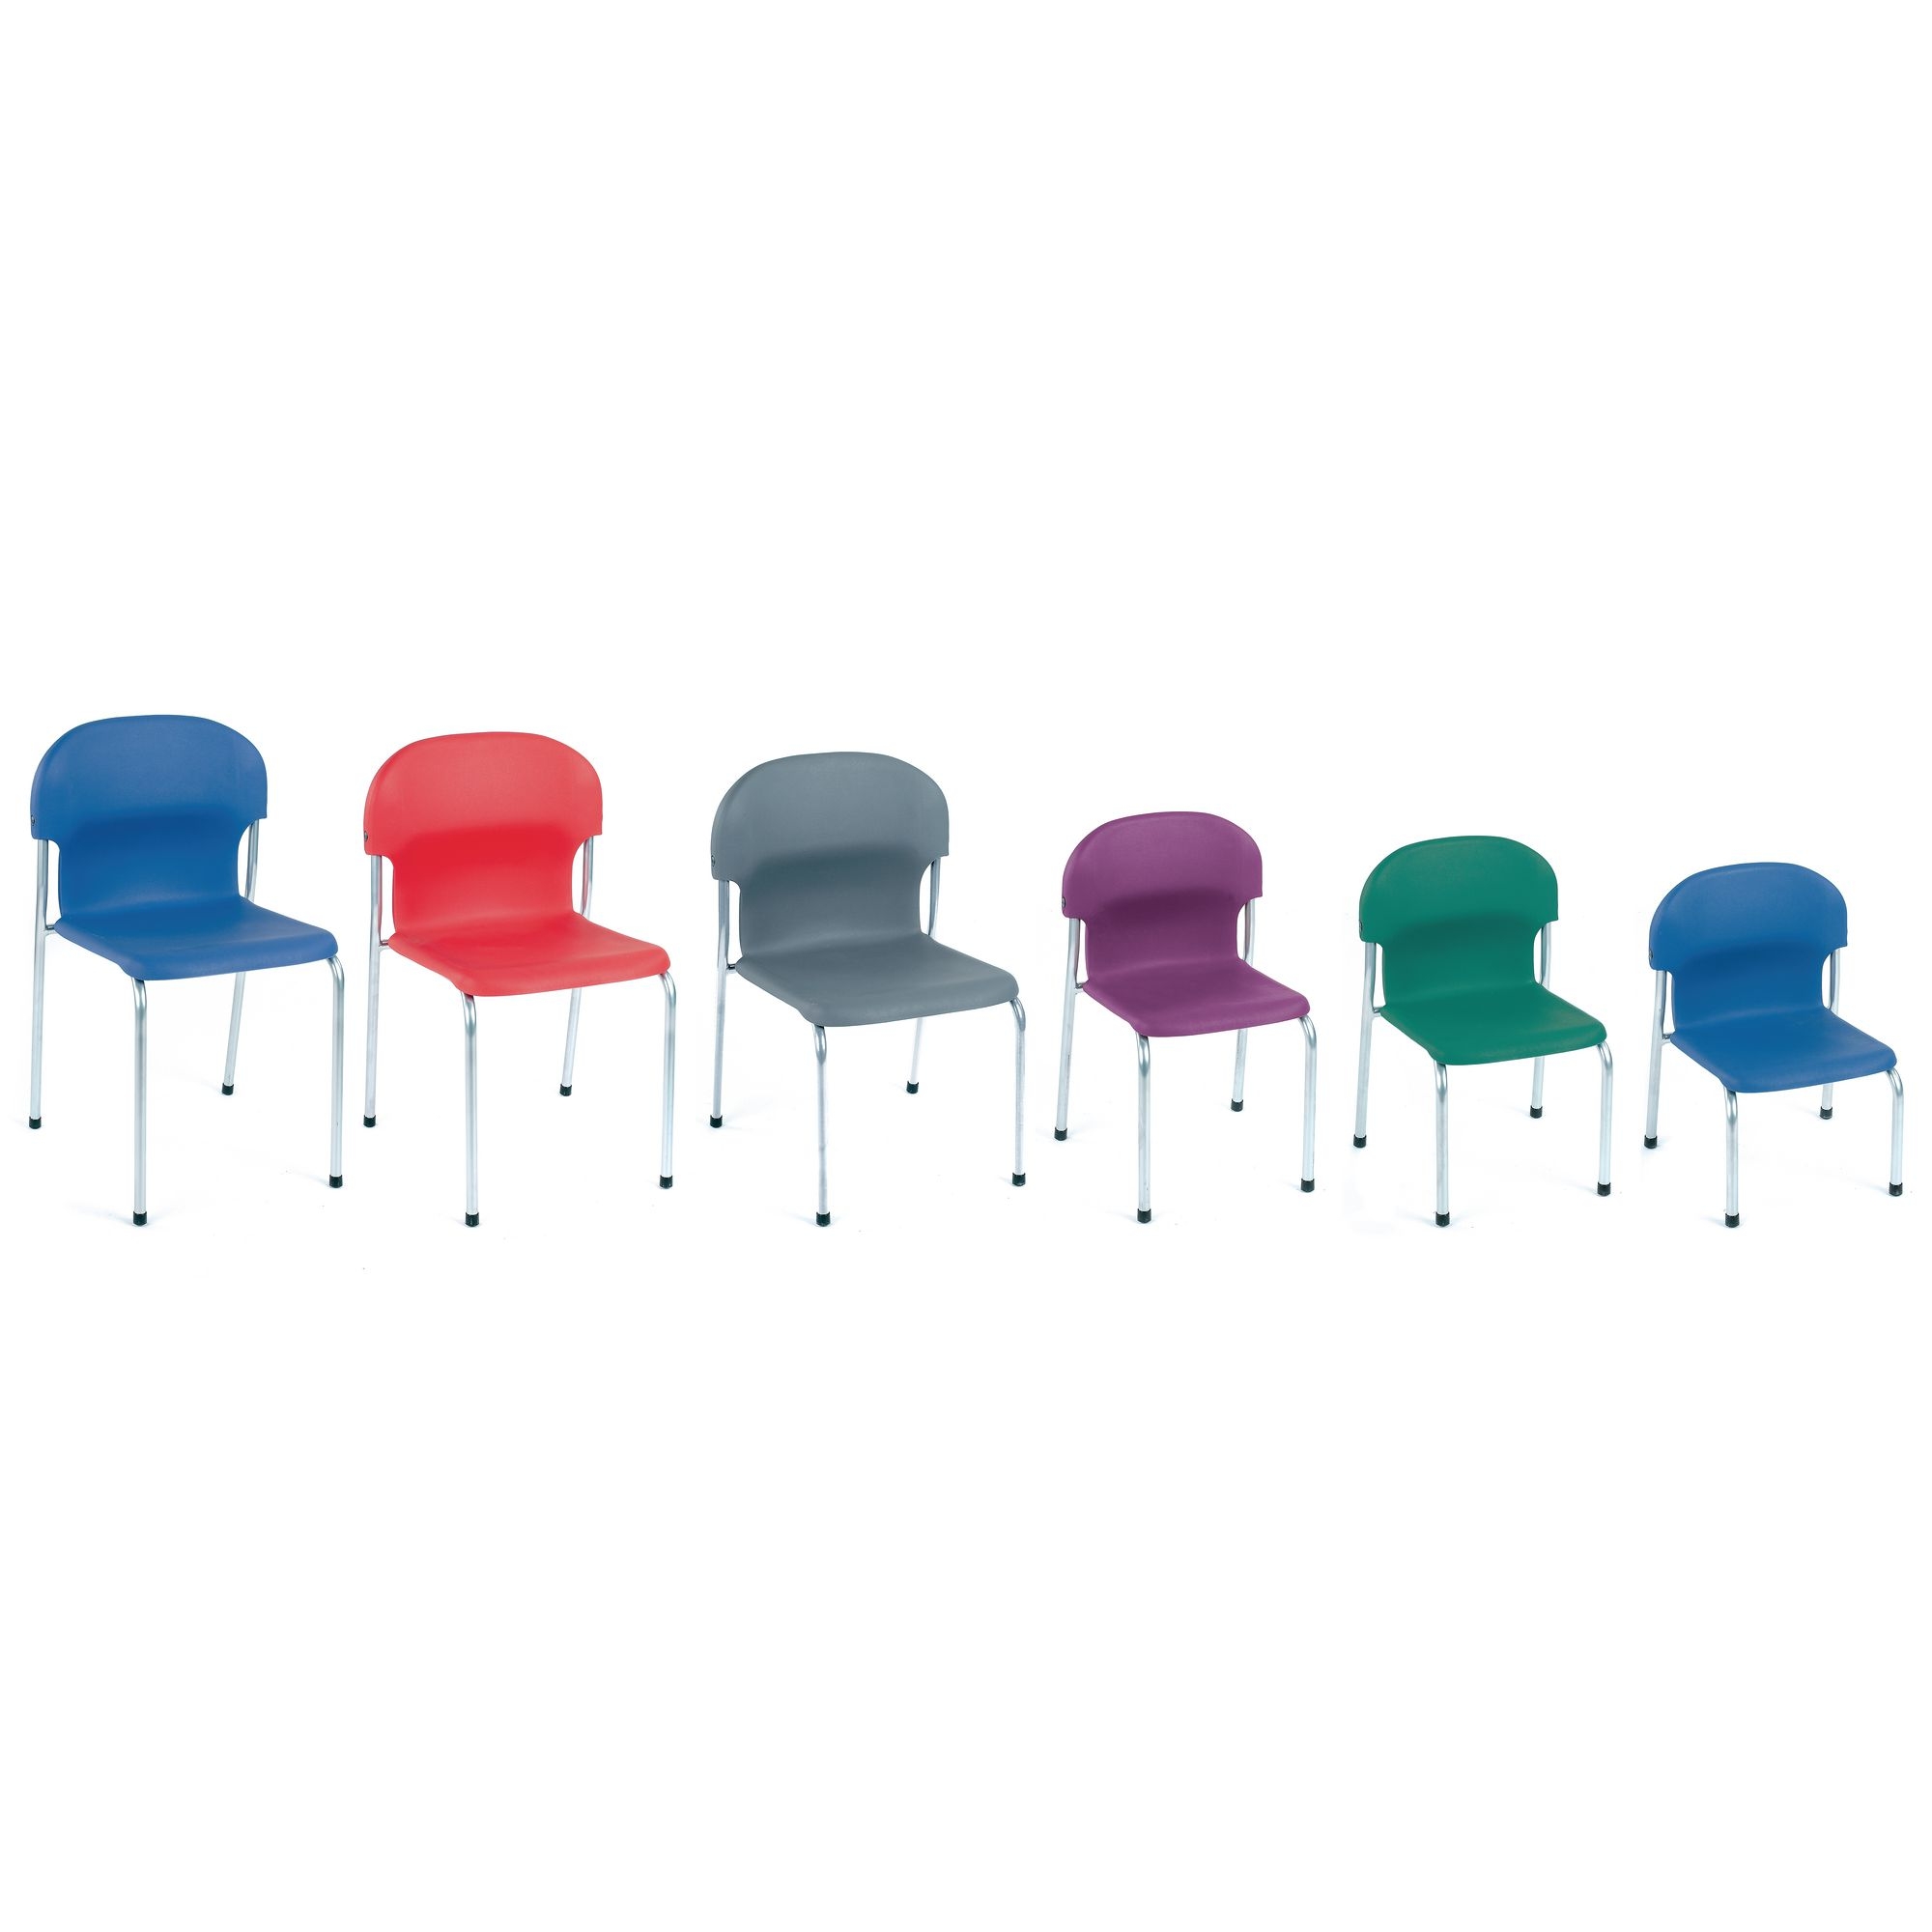 Chair 2000 - Size F - 460mm - Red